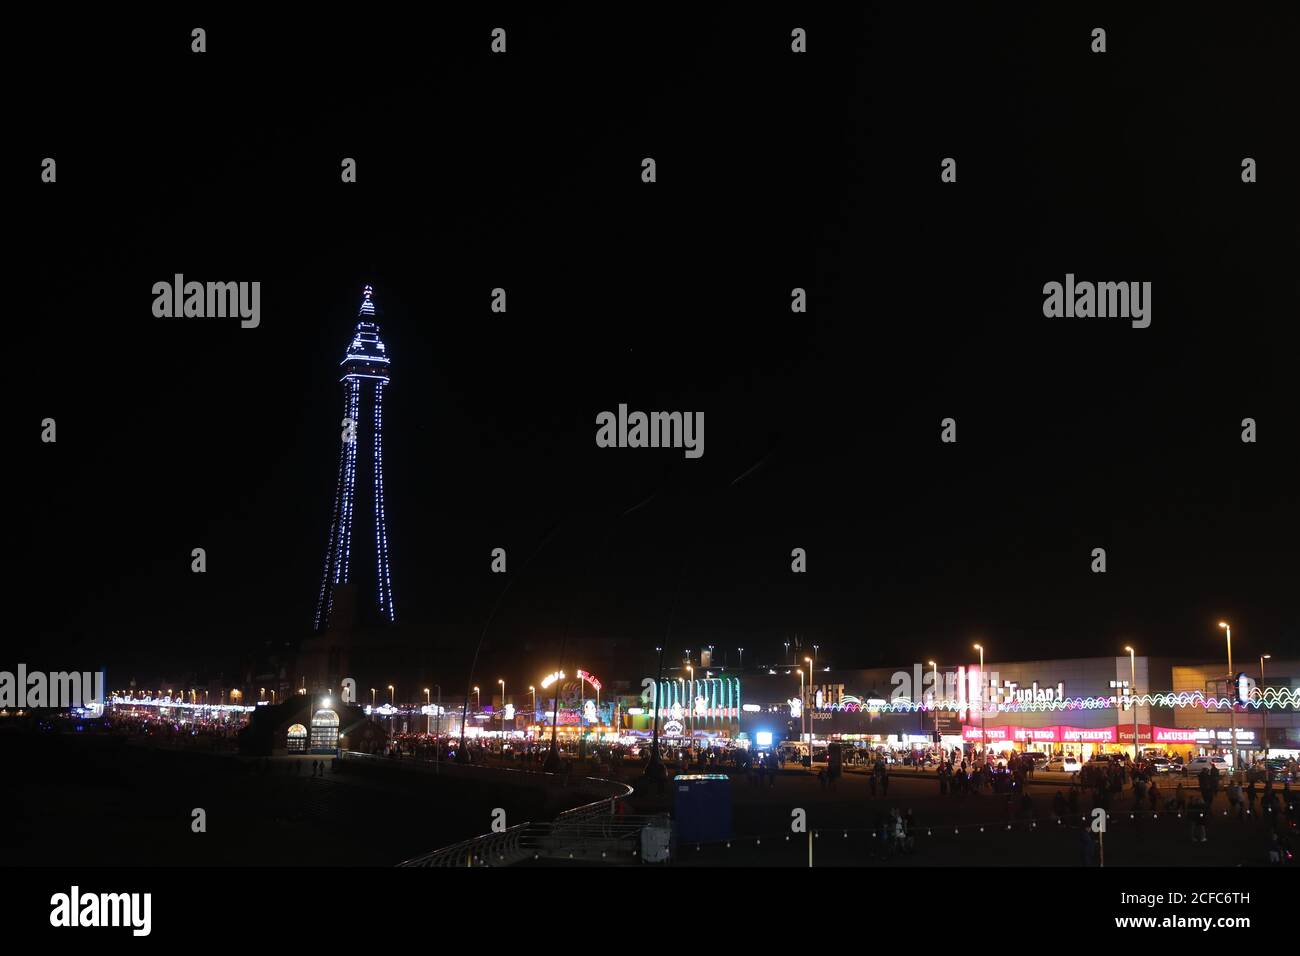 Blackpool on the first day of the annual lights display in the north west England seaside resort. This year the lights will remain on display until January, two months longer than normal, to help boost the tourism trade which has been hit by the Covid-19 pandemic. Stock Photo